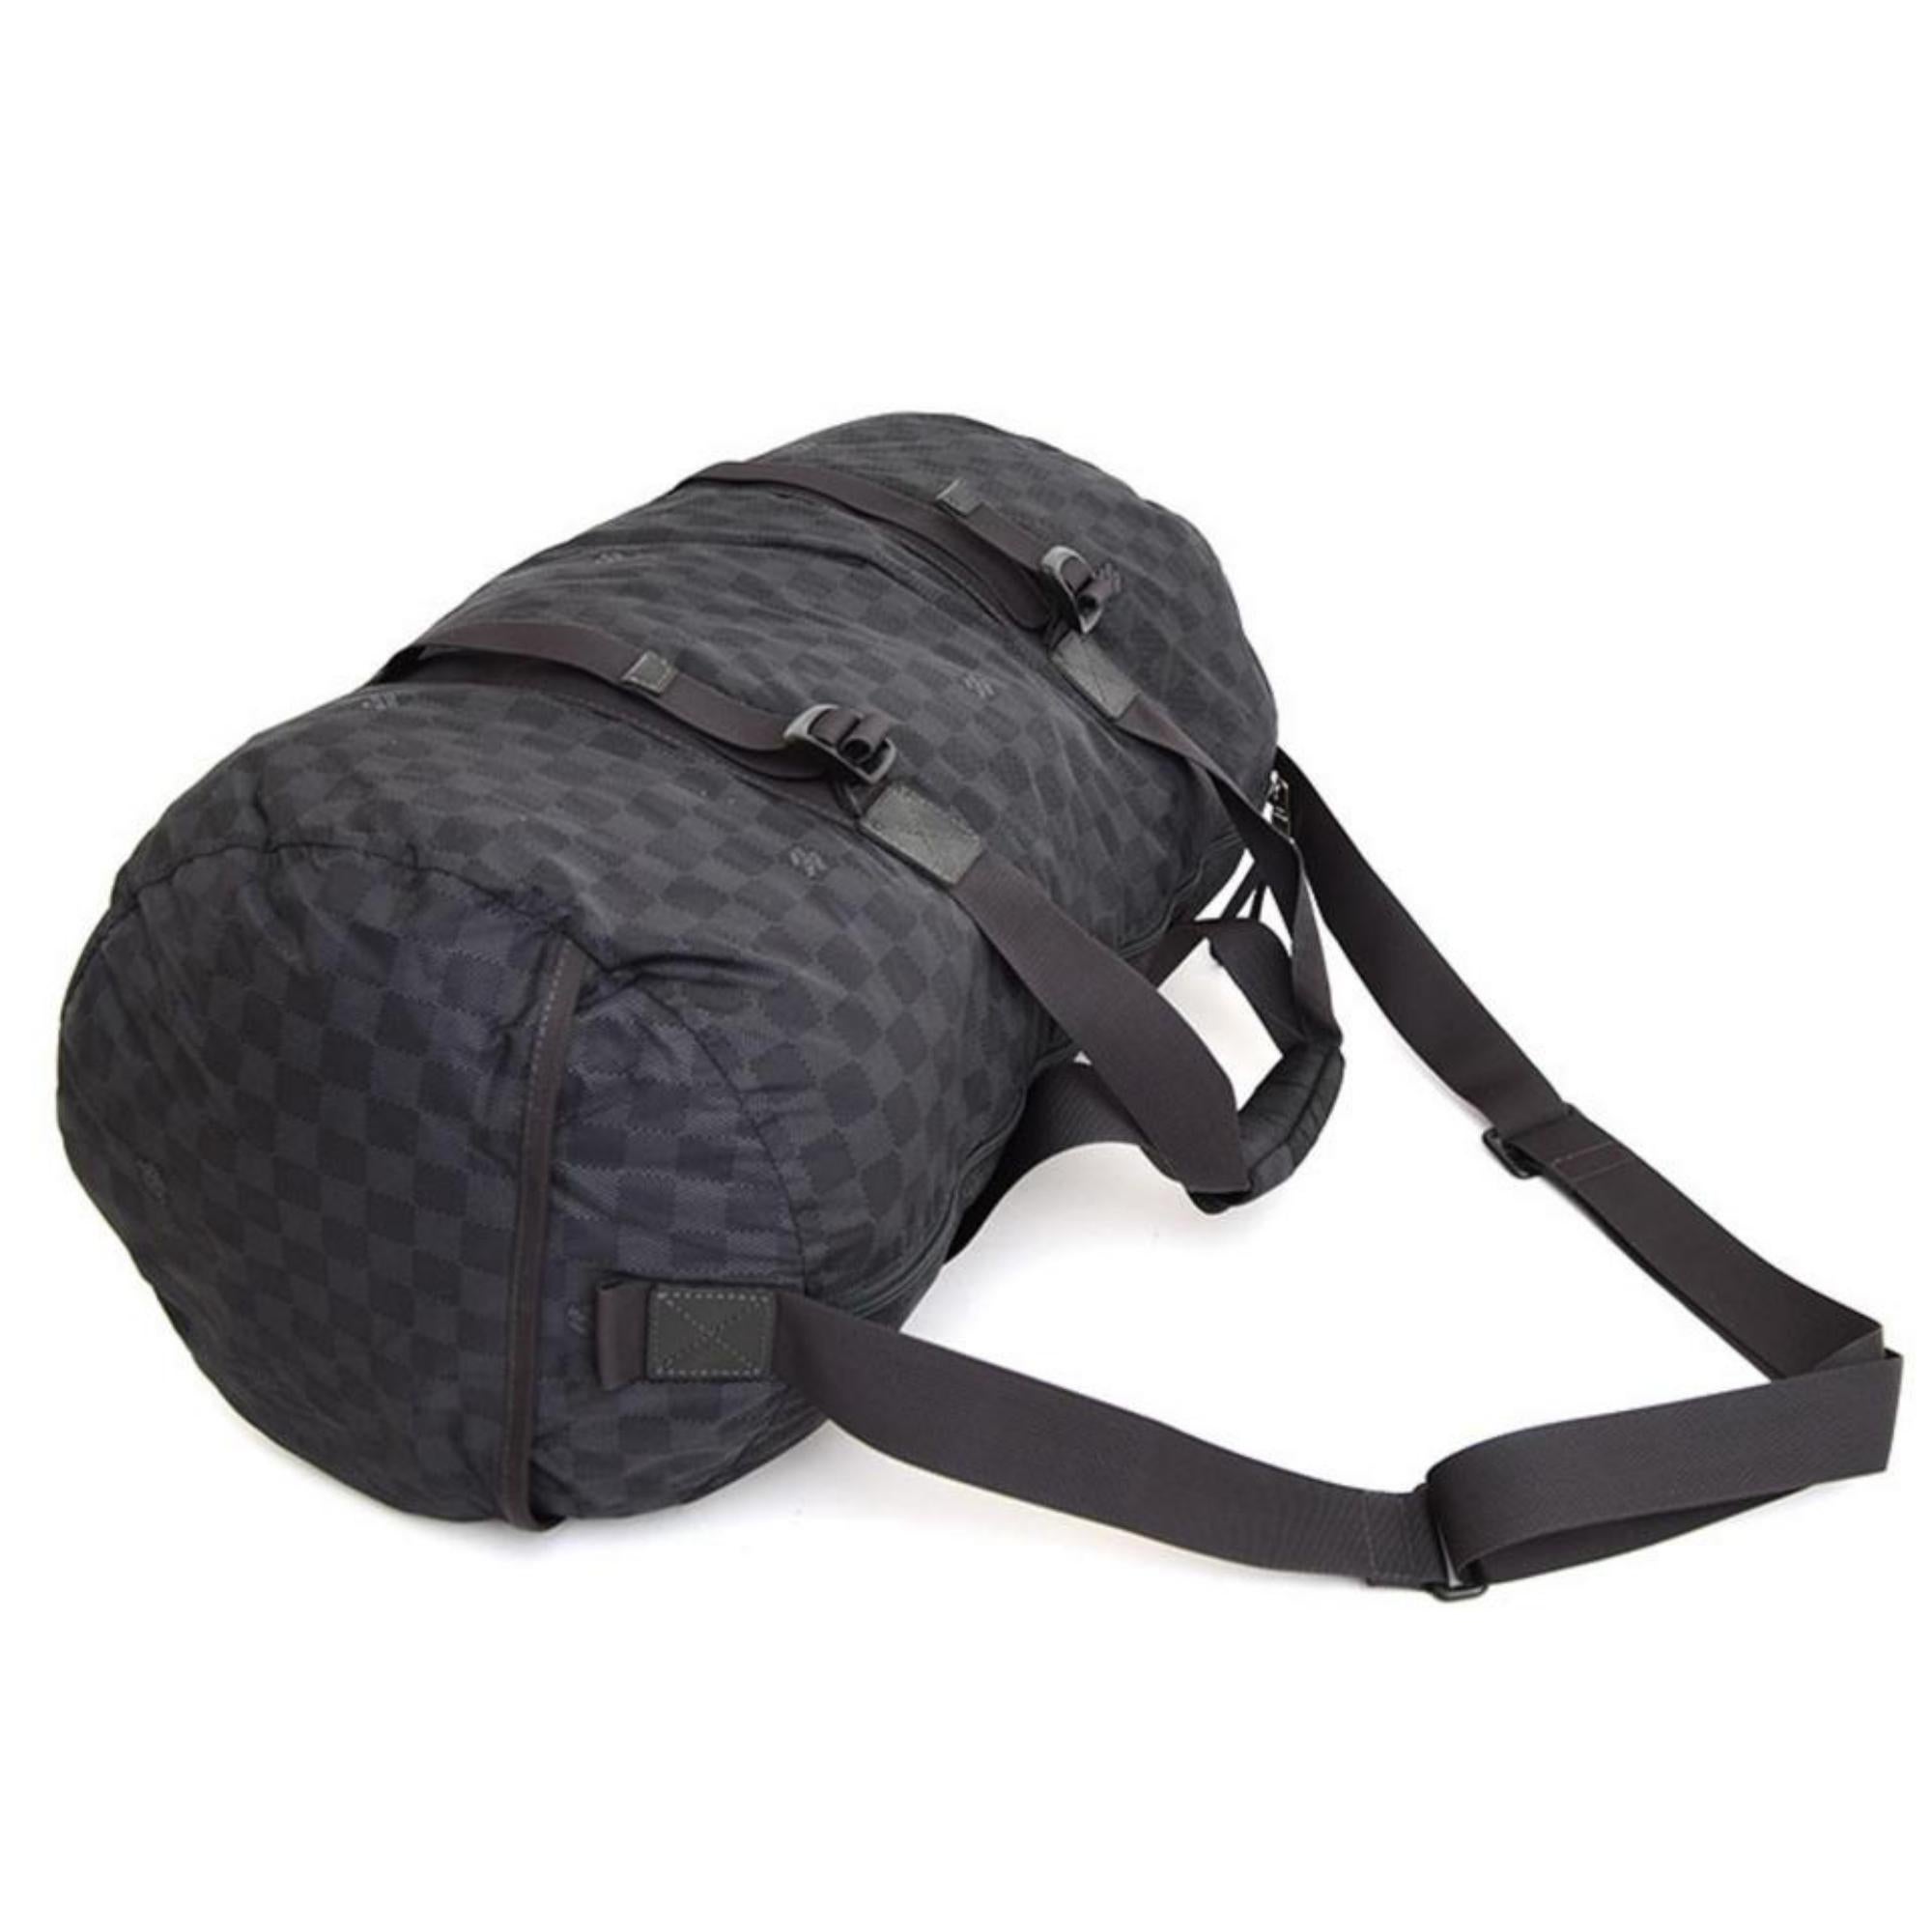 Louis Vuitton Damier Graphite Practical Keepall Bandouliere Duffle 231LV504
Date Code/Serial Number: BO2111
Made In: France 
Measurements: Length: 20